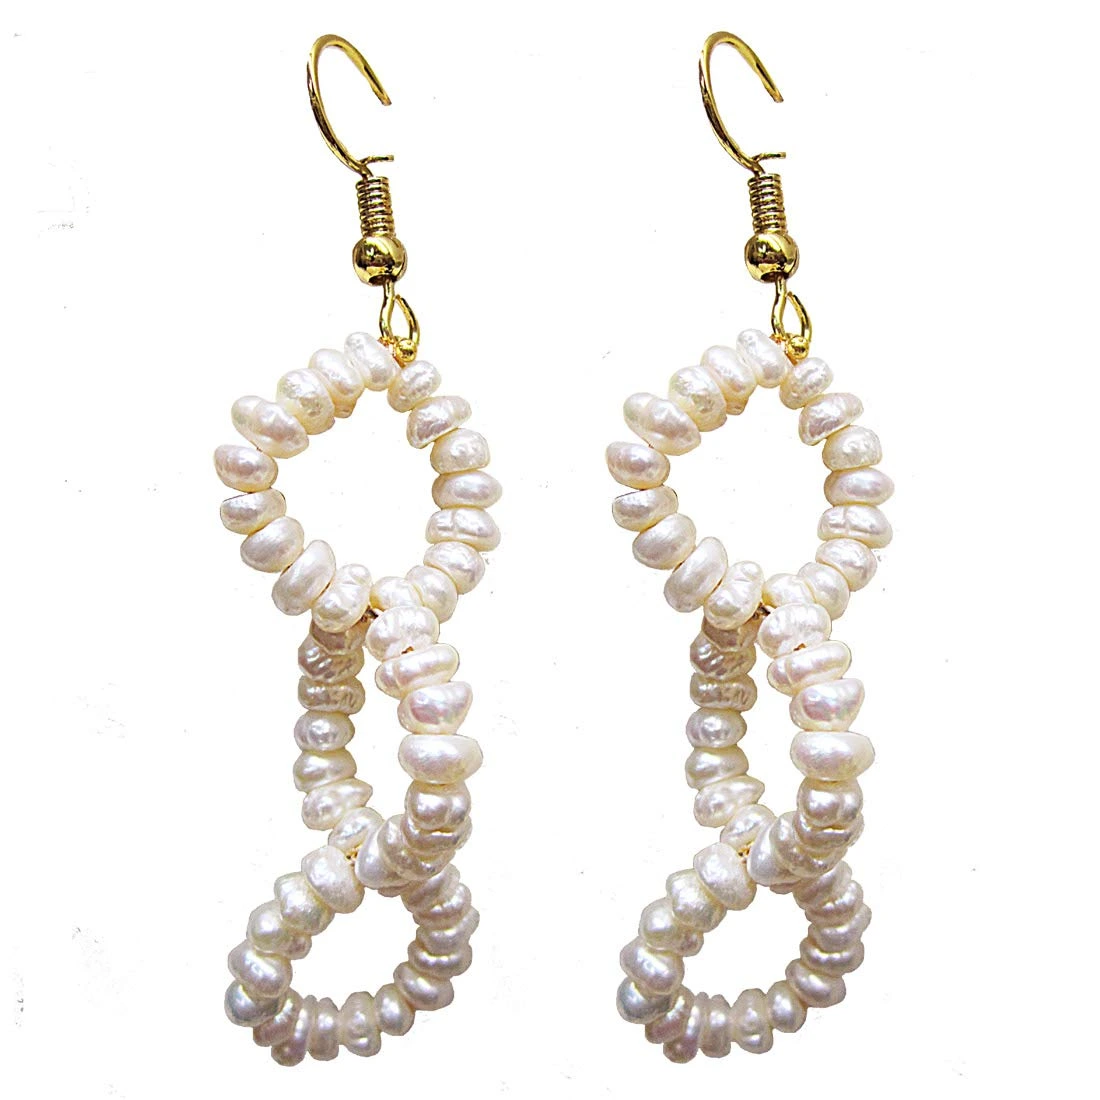 Dangling Real Freshwater Pearl and Gold Plated Wire Style Earrings (SE387)